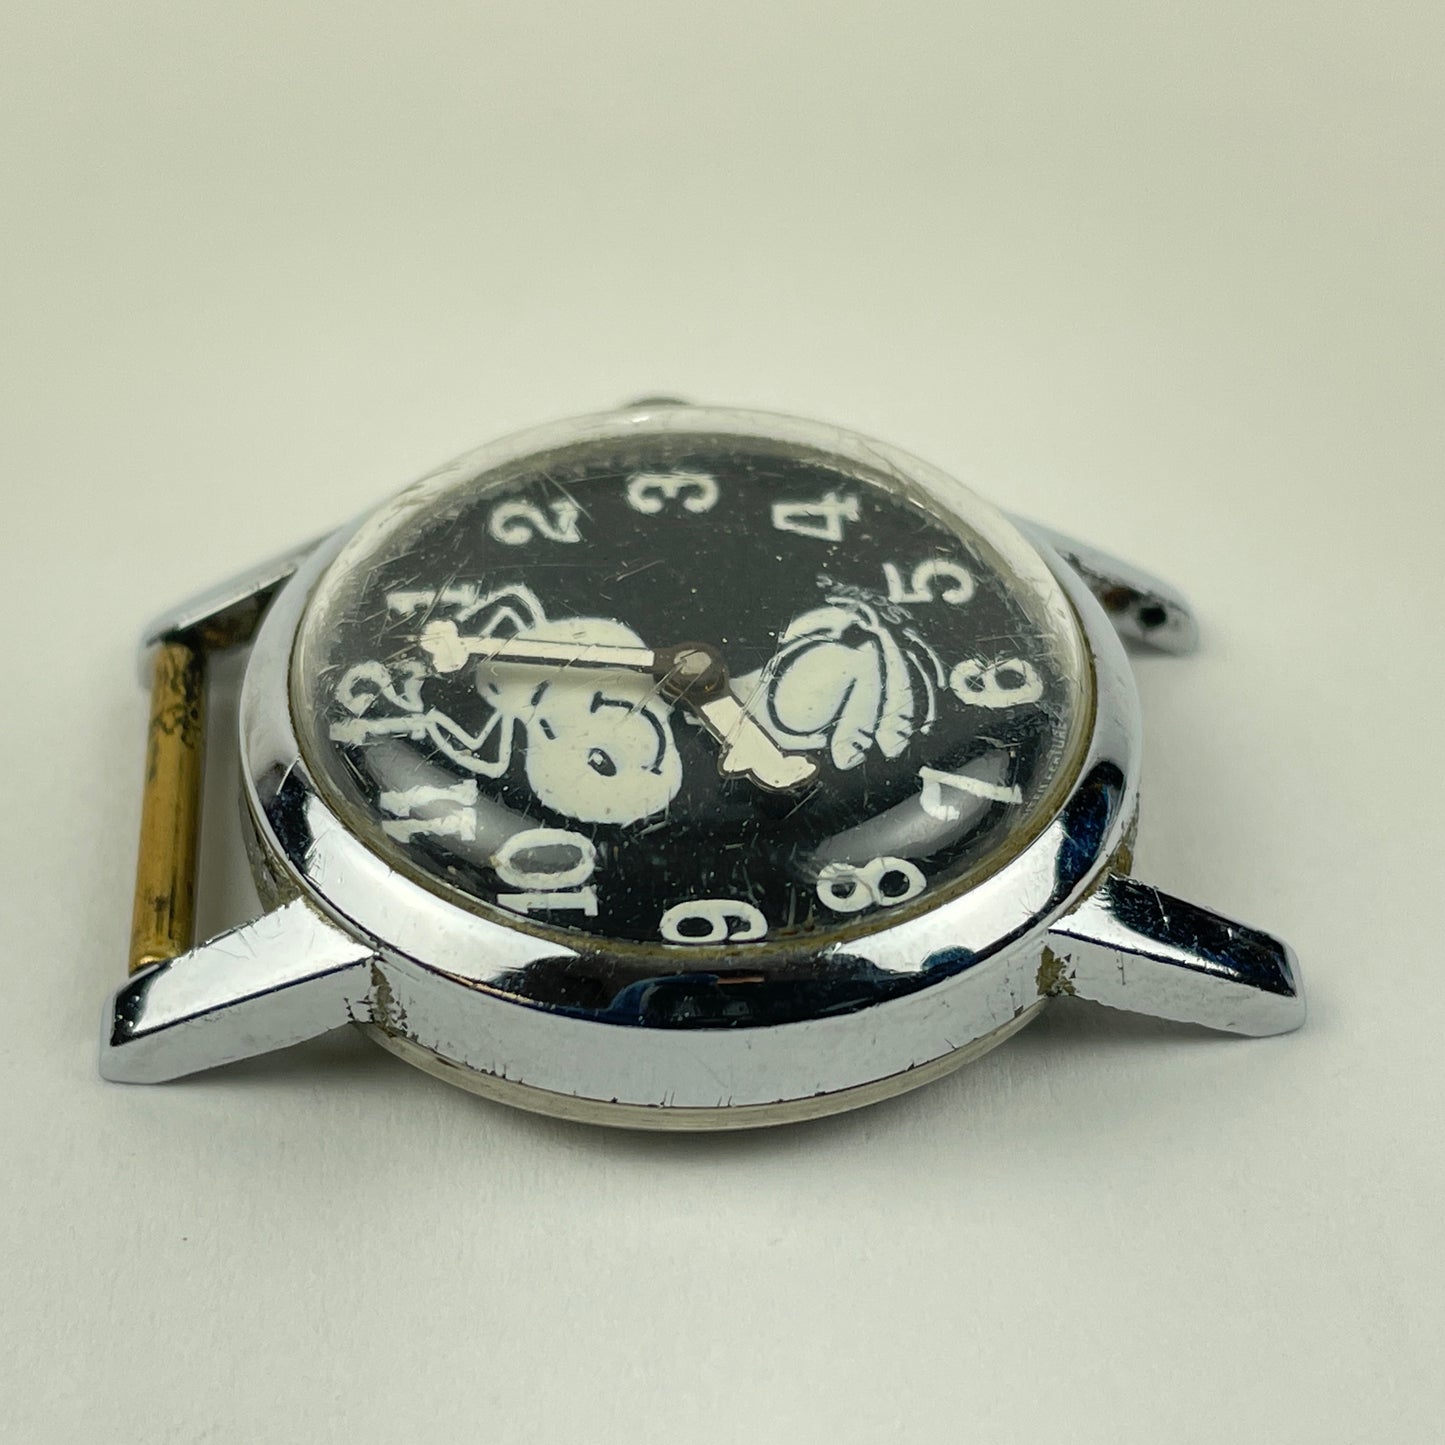 Lot 115- United Features Vintage Mechanical “SNOOPY” Wristwatch